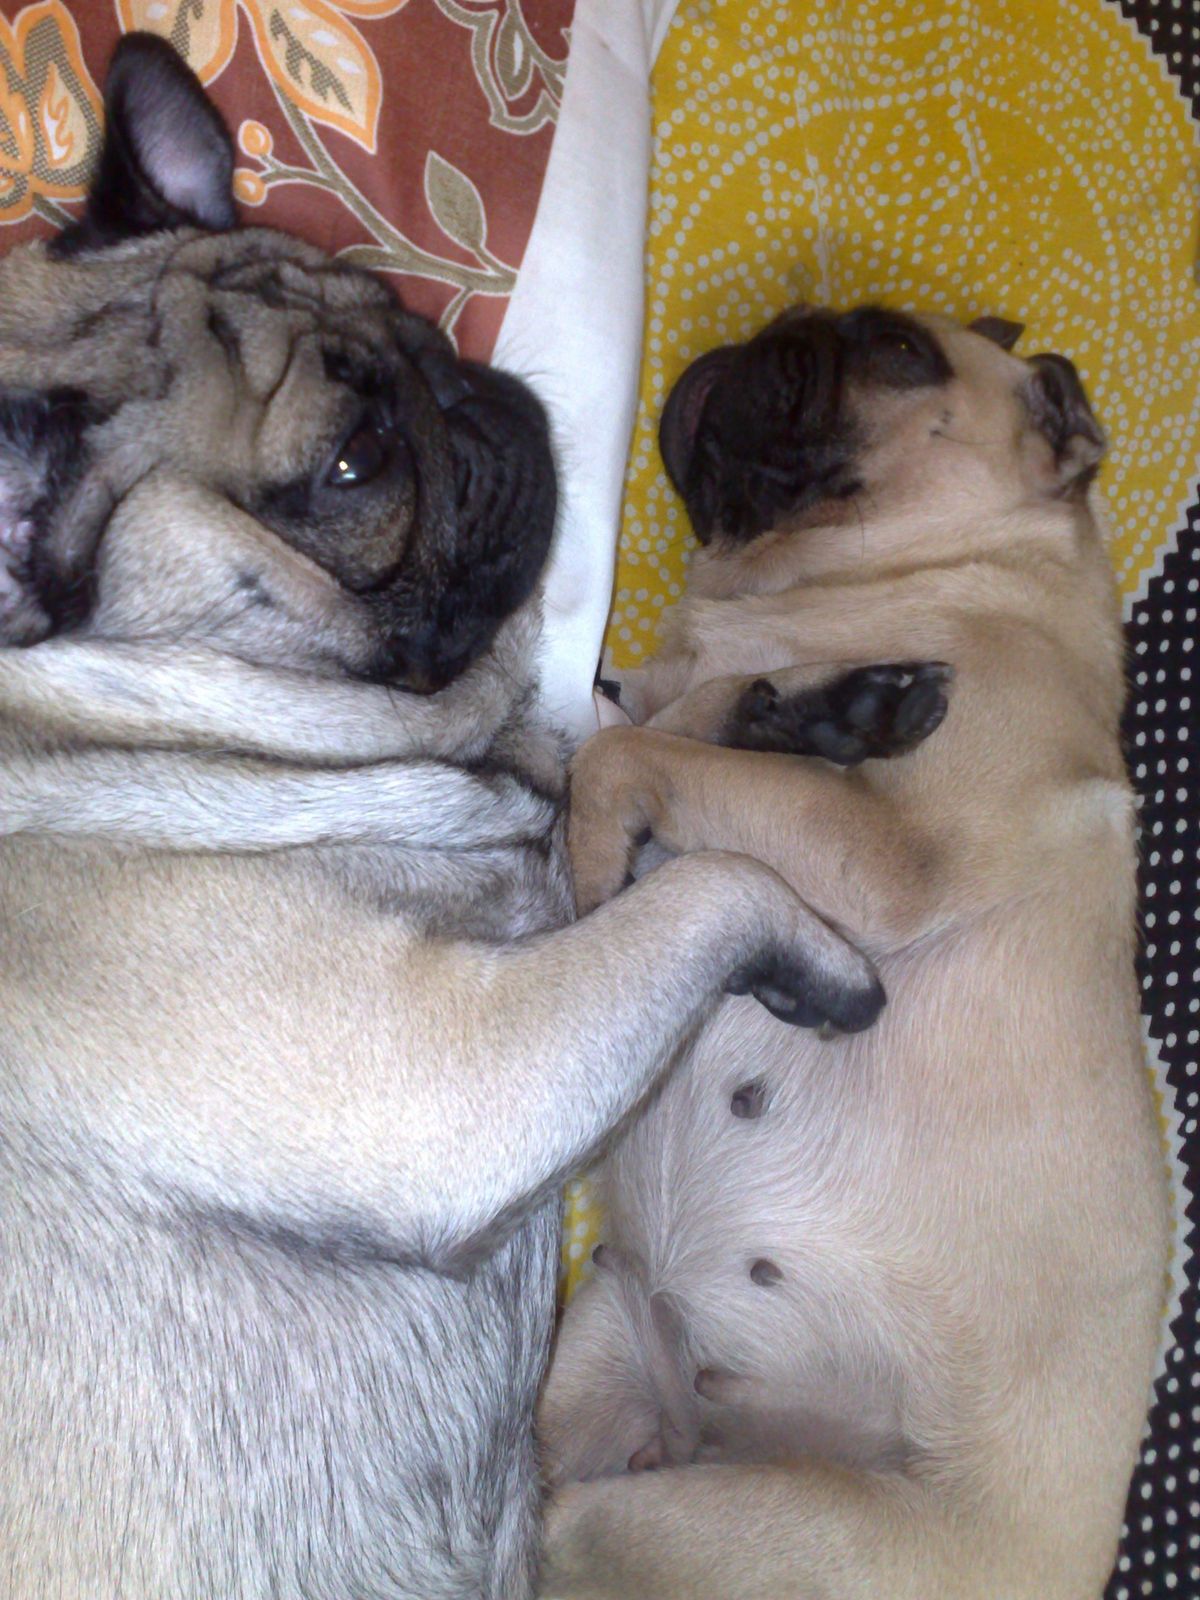 How to take care of your PUG How to take care of PUG